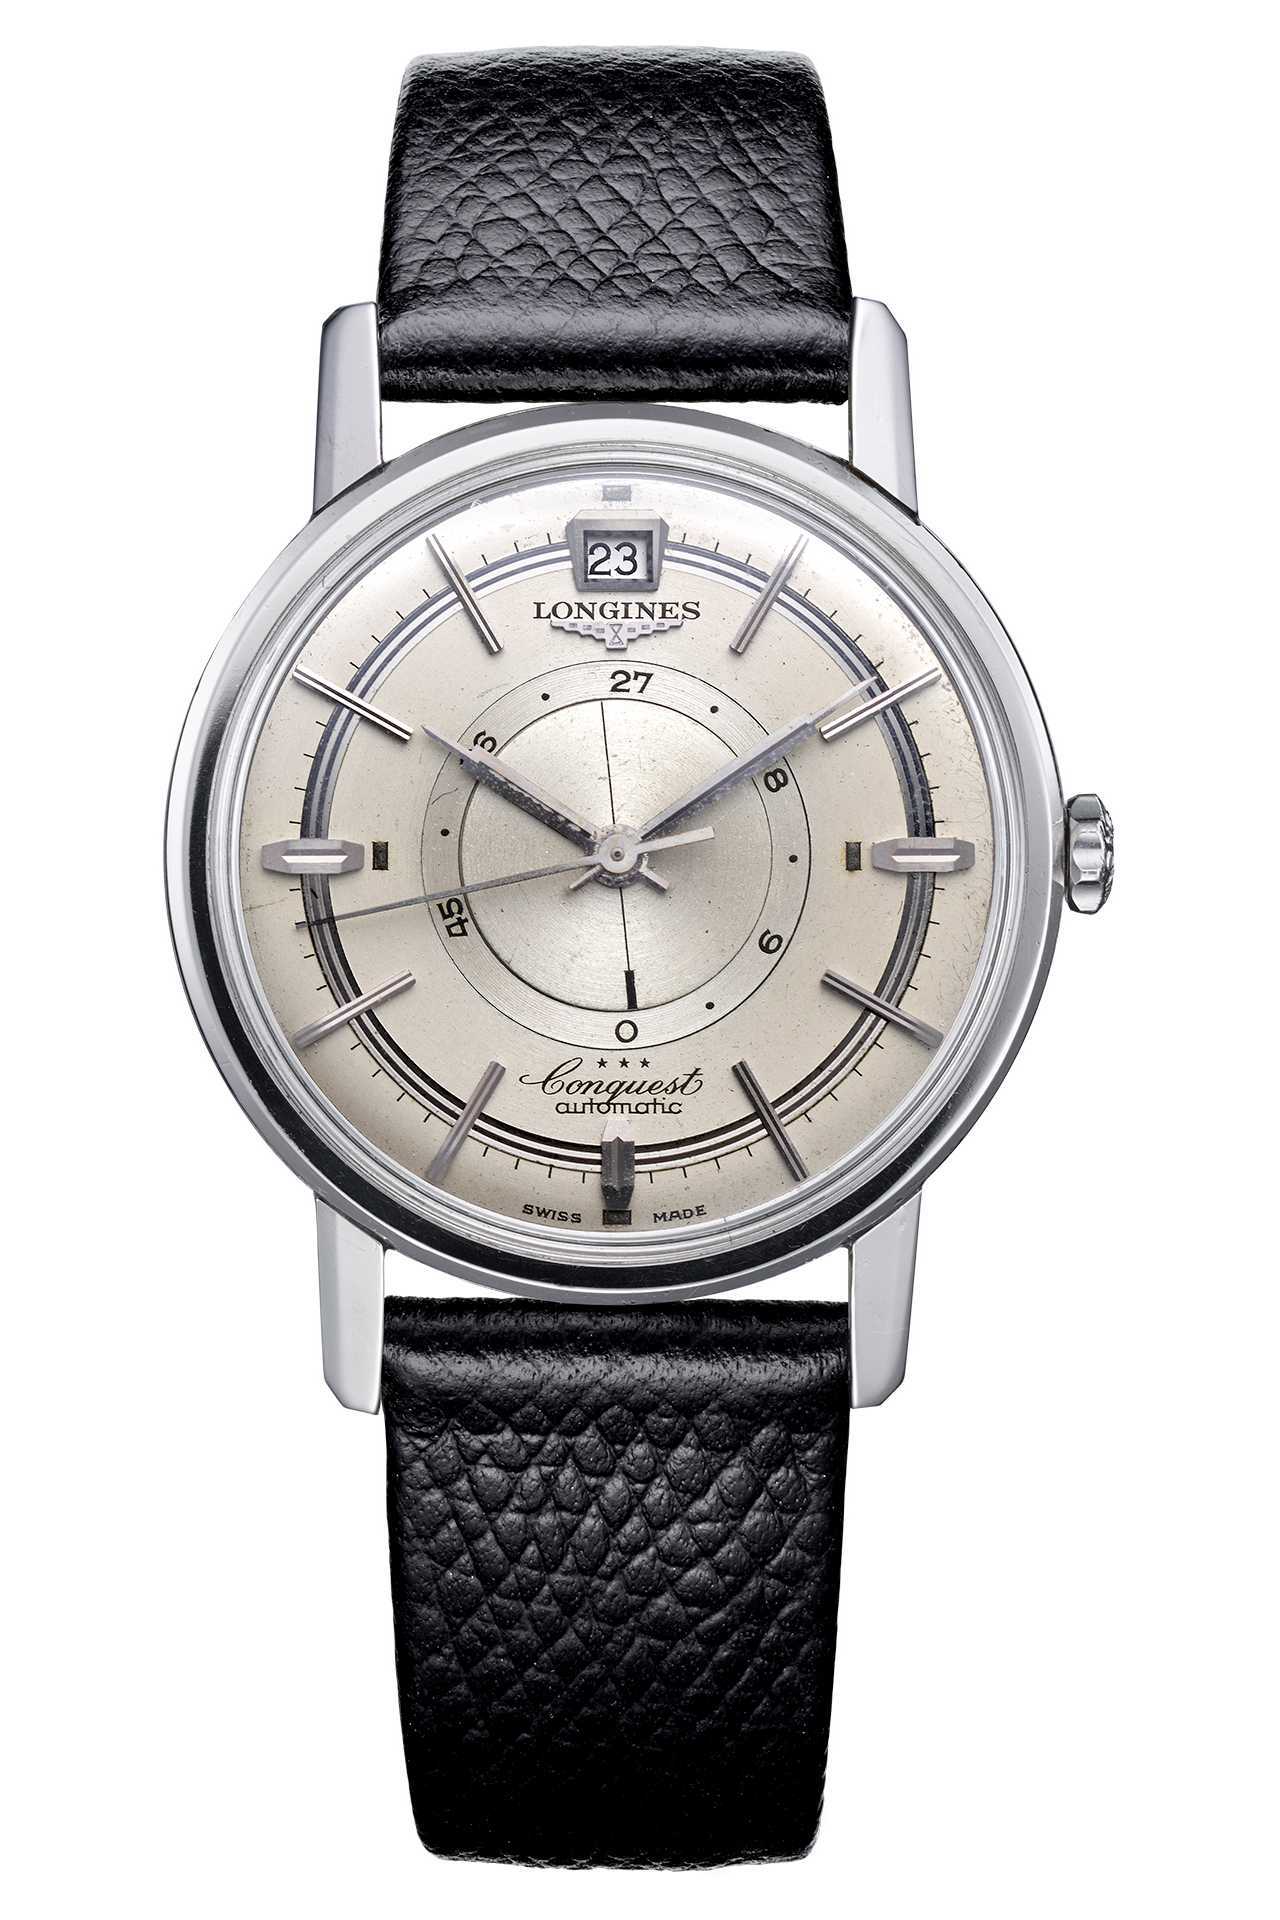 Longines Conquest Power Reserve Automatic ref. 9028 watch from 1959